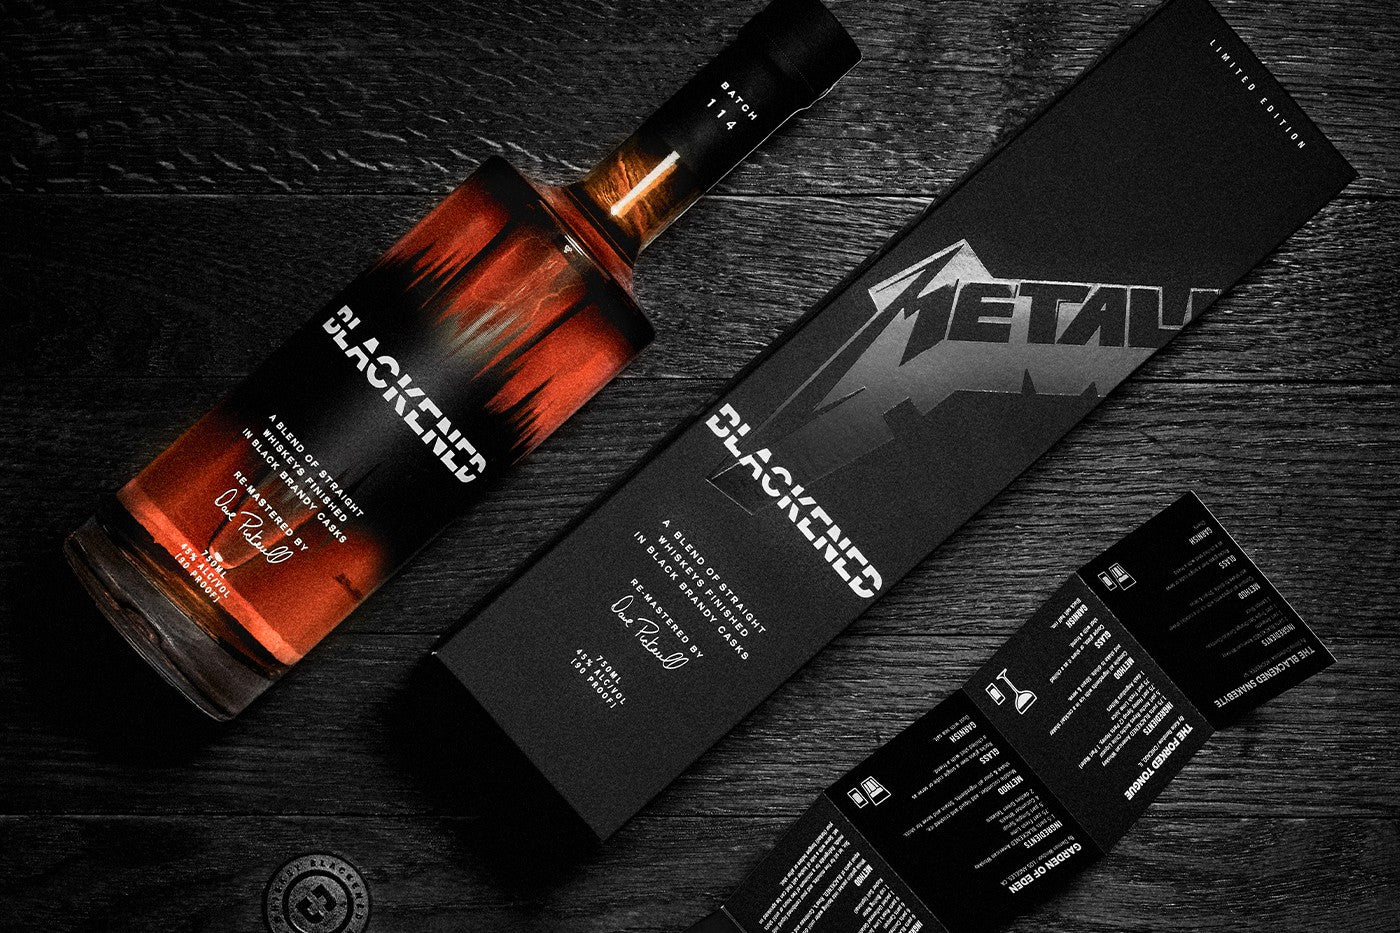 Metallica commemorates 30th anniversary of The Black Album with Batch 114 of their Blackened American Whiskey